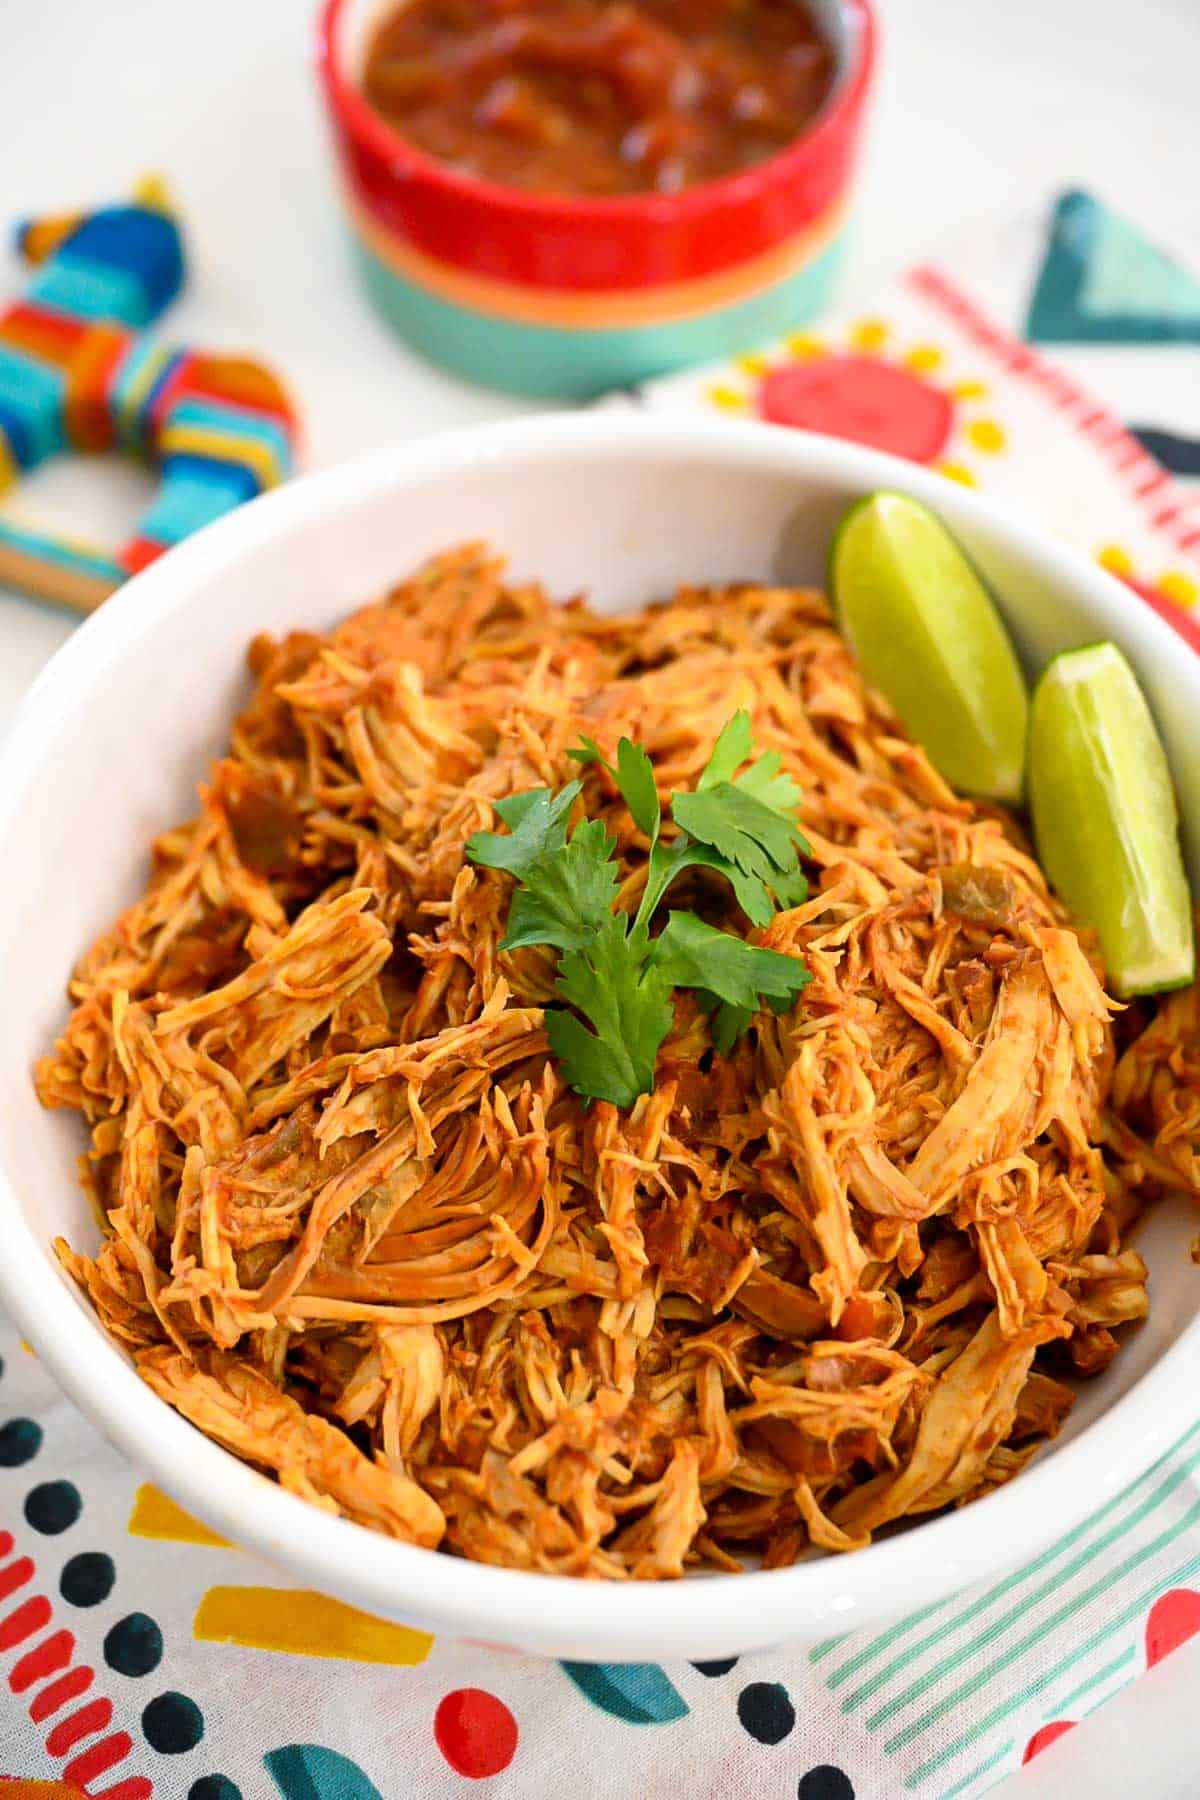 Shredded slow cooker salsa chicken in a white on on a festive brightly colored table setting with a bowl of salsa in the background.